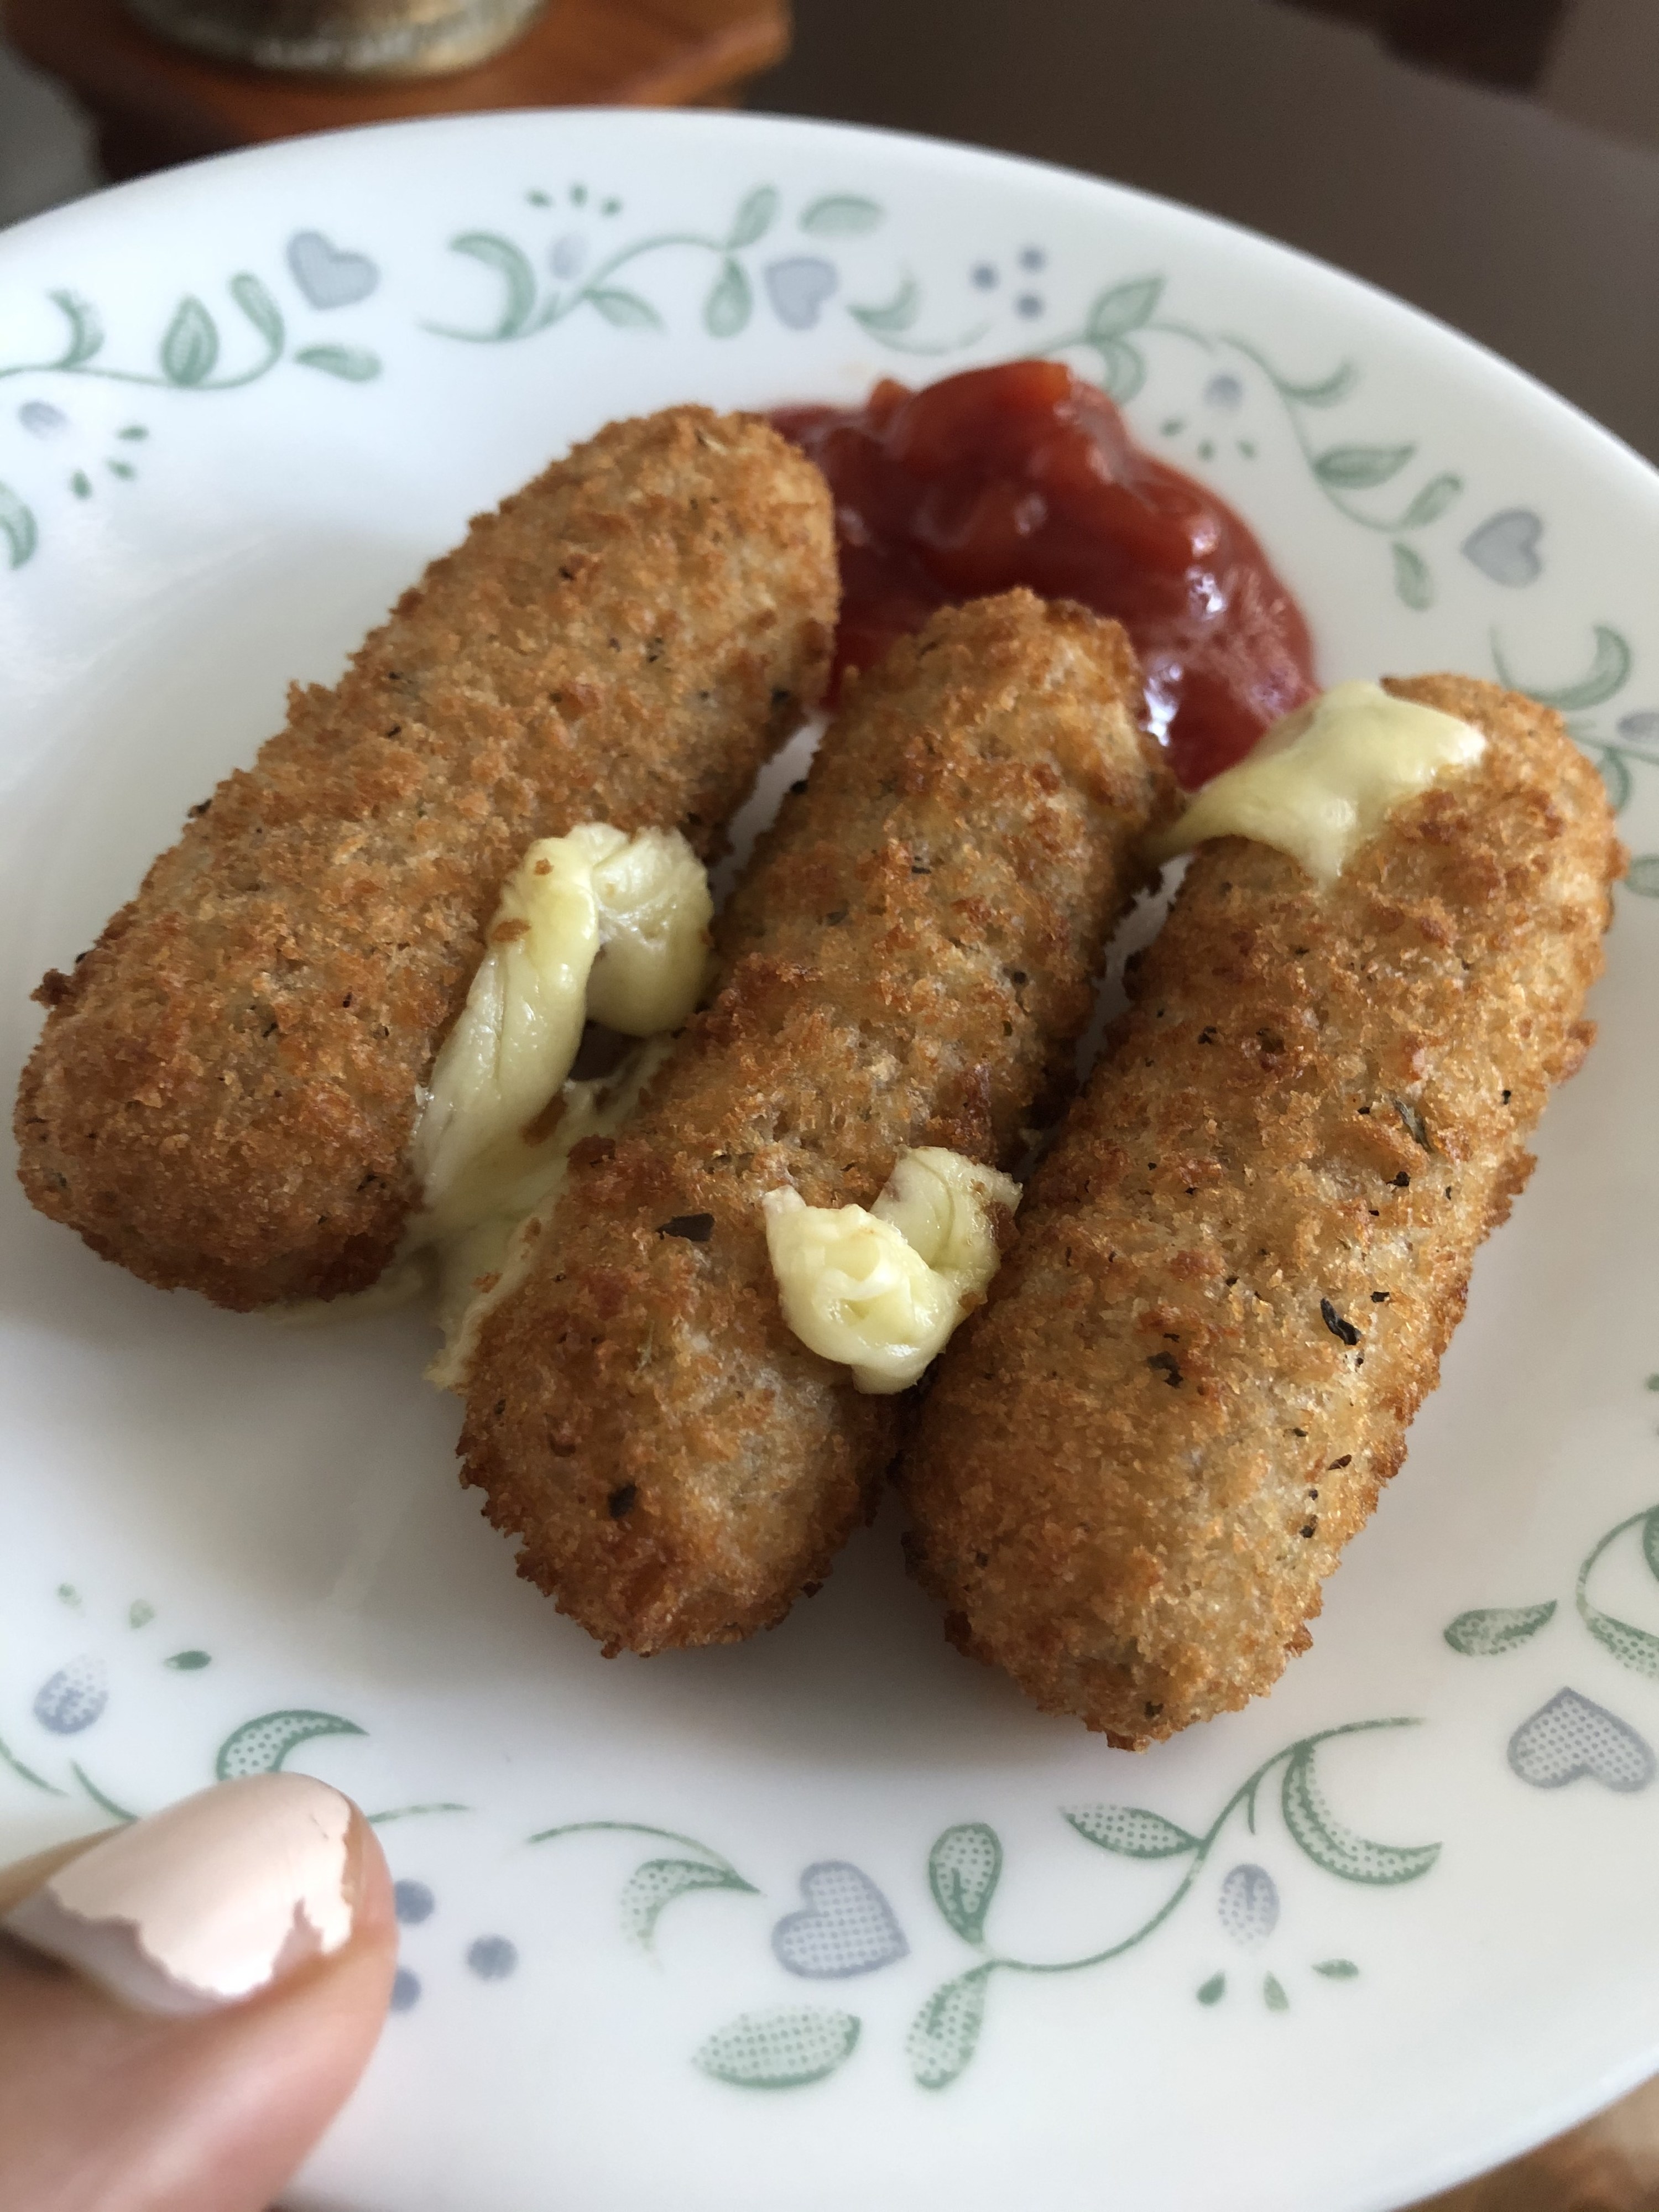 Mozzarella sticks on a plate with cheese gushing out of them